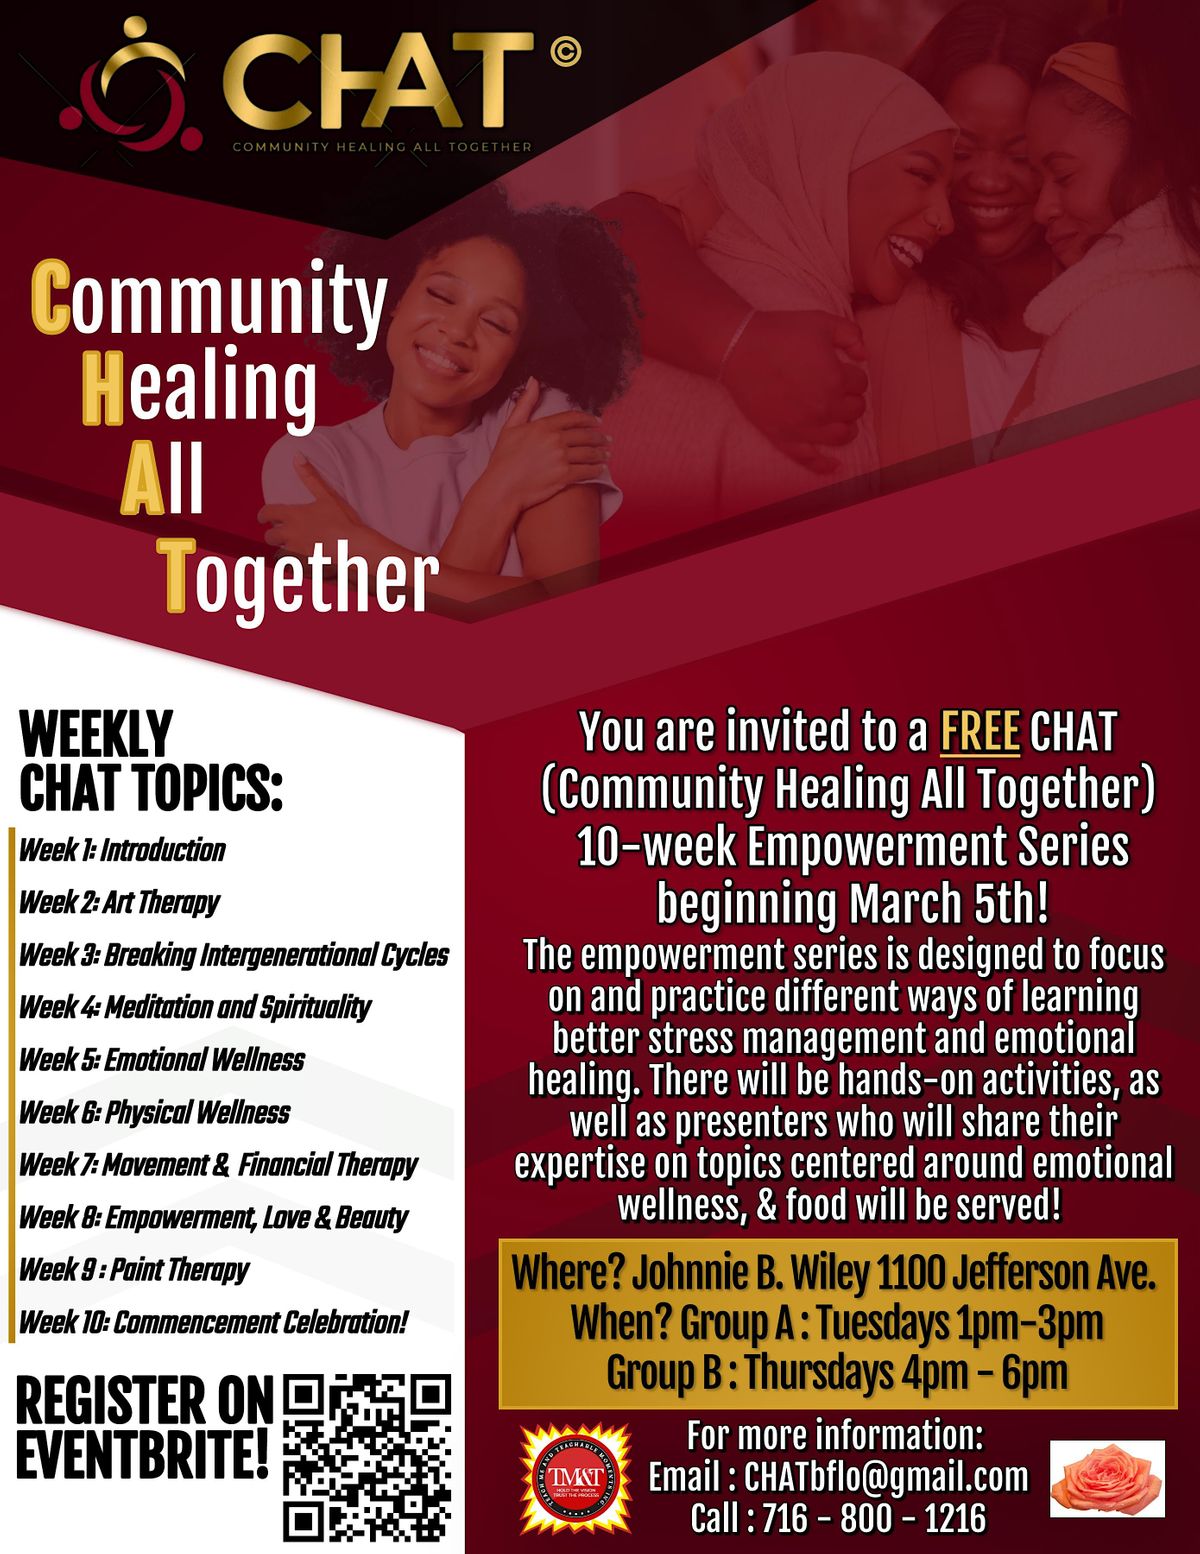 COMMUNITY HEALING ALL TOGETHER CHAT EMPOWERMENT SERIES